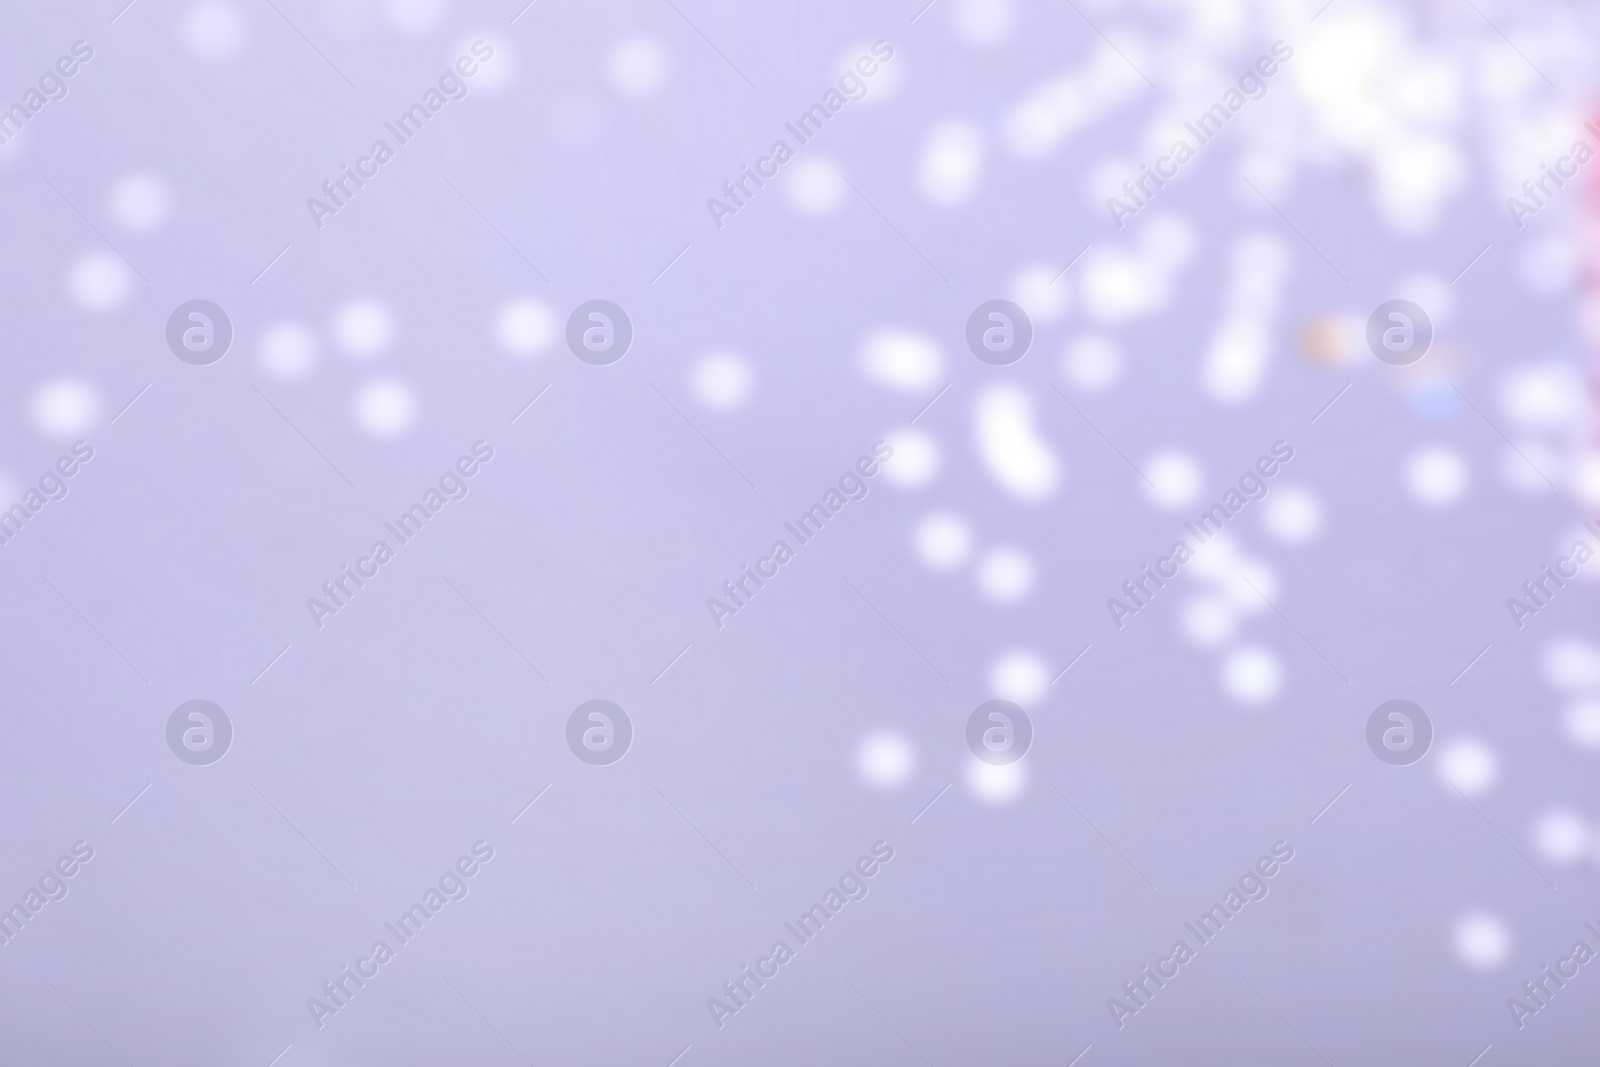 Photo of Blurred view of festive lights on violet background. Bokeh effect